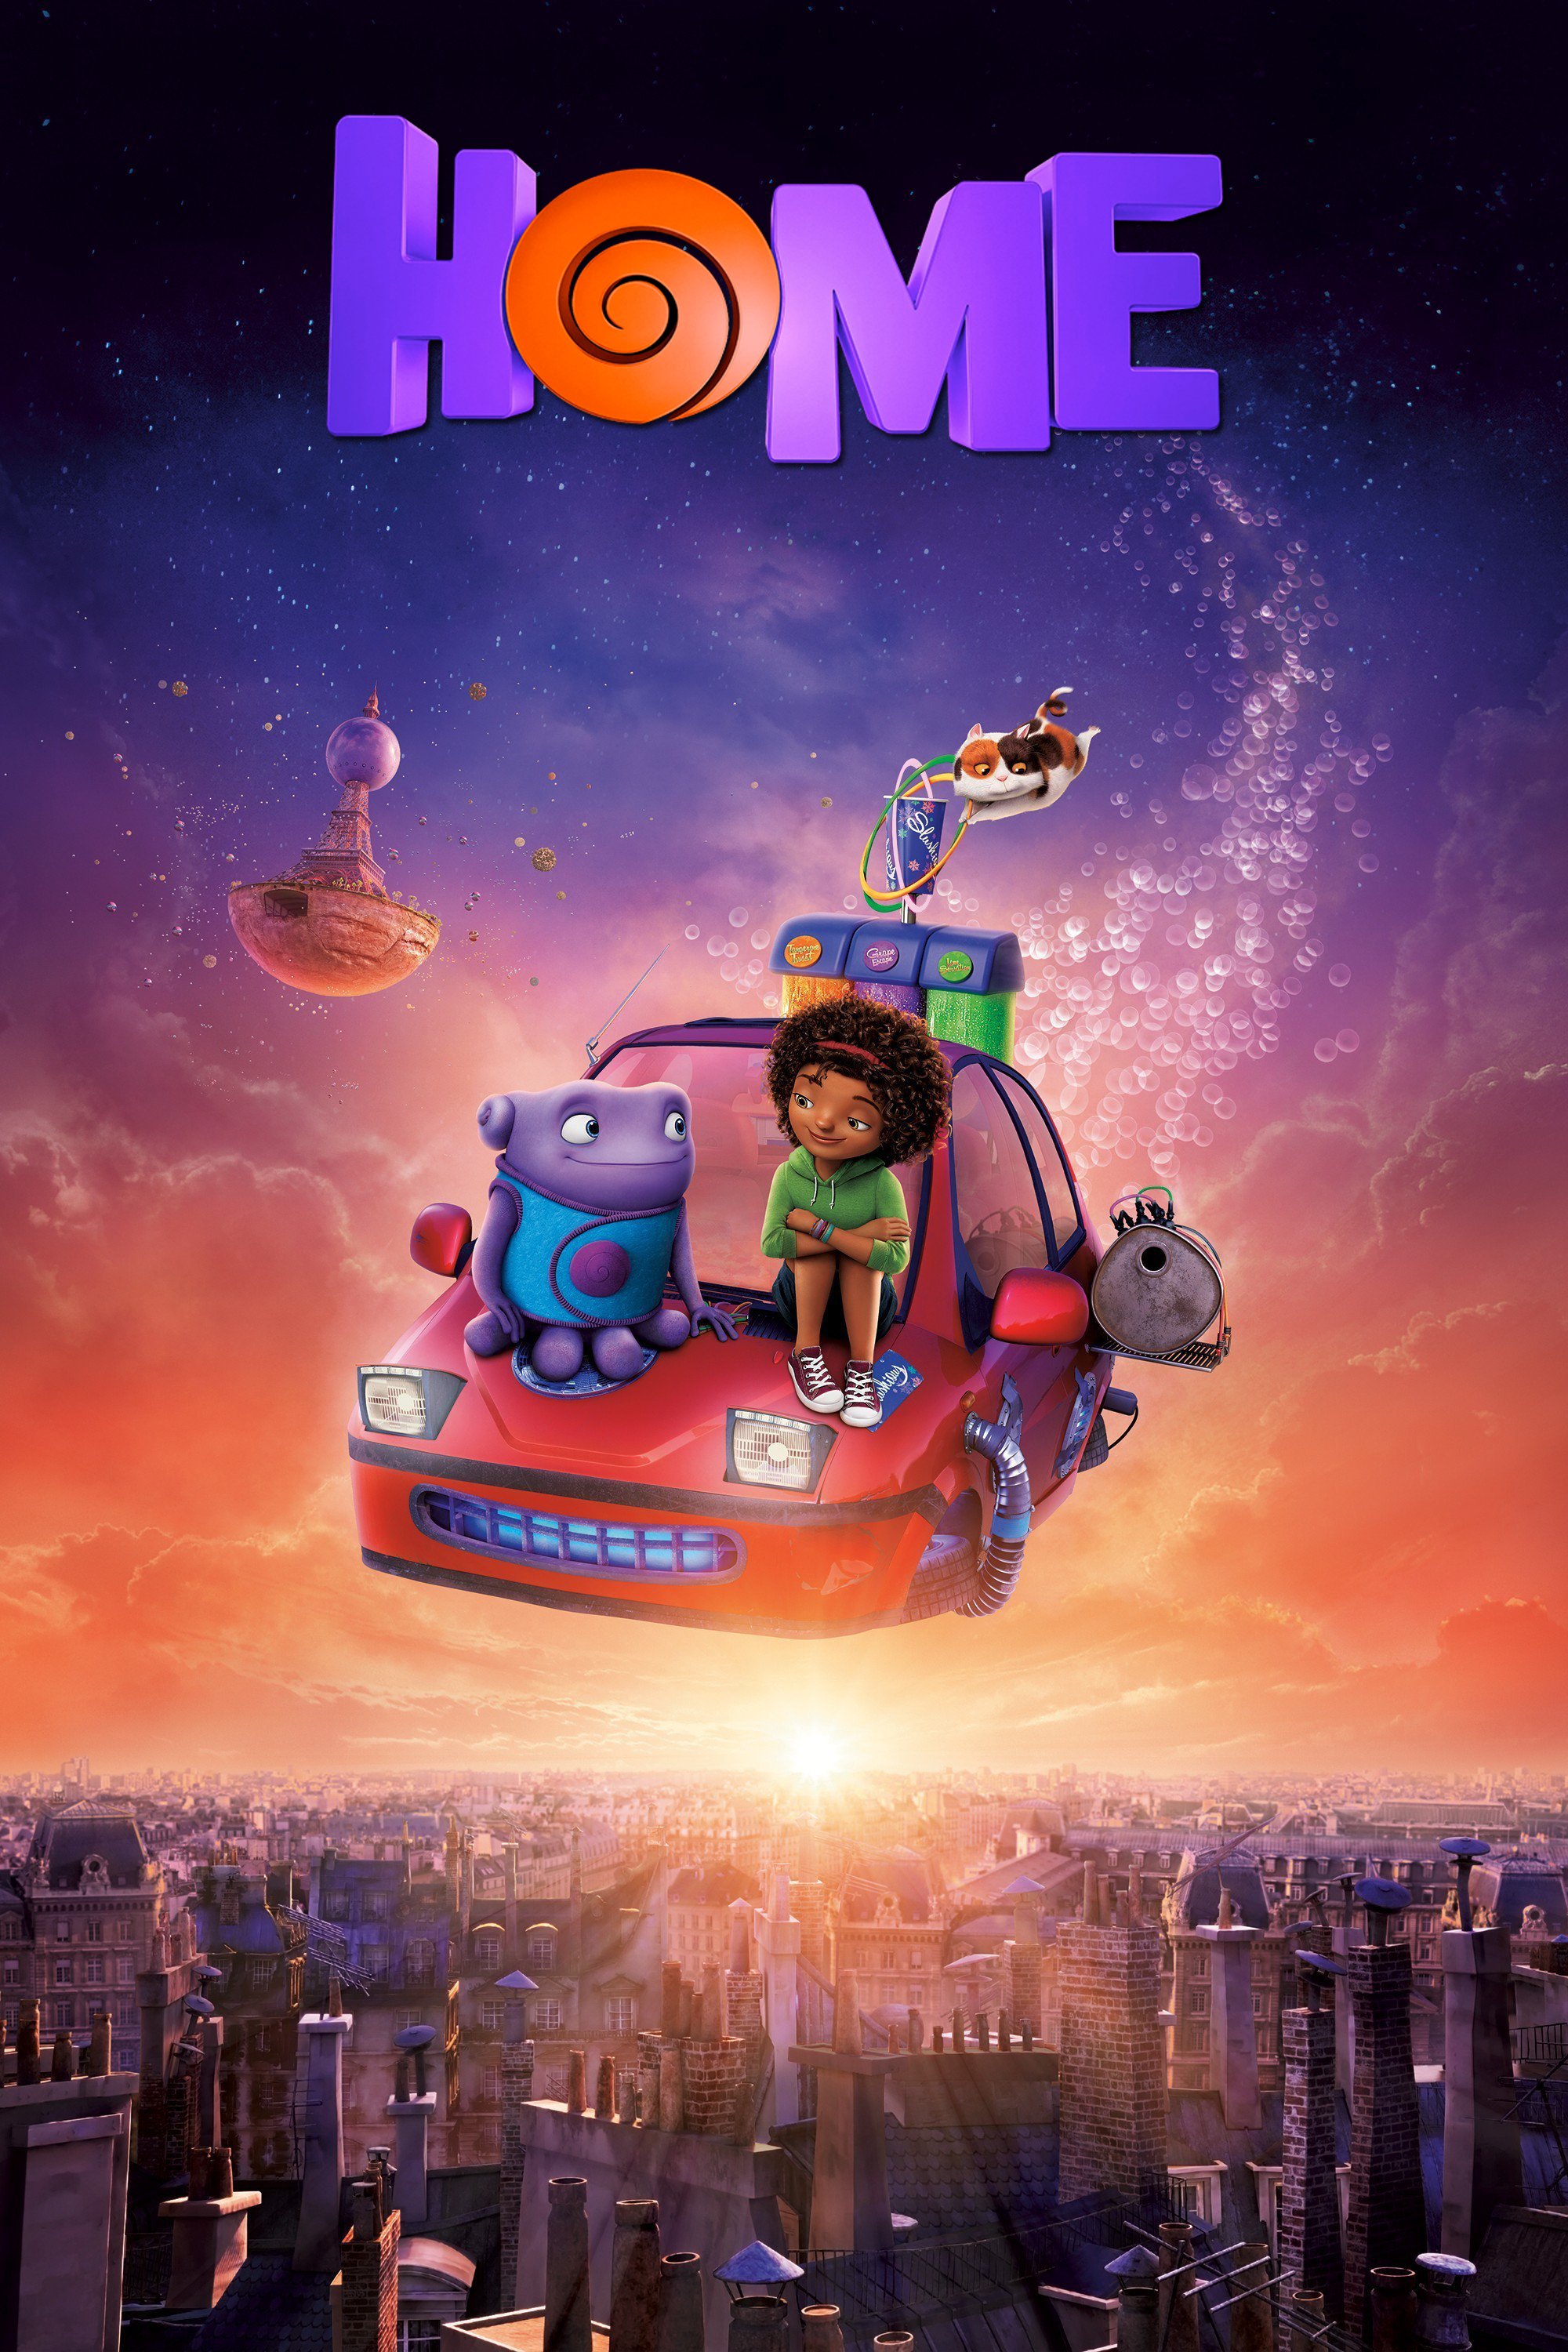 Poster for the movie "Home"